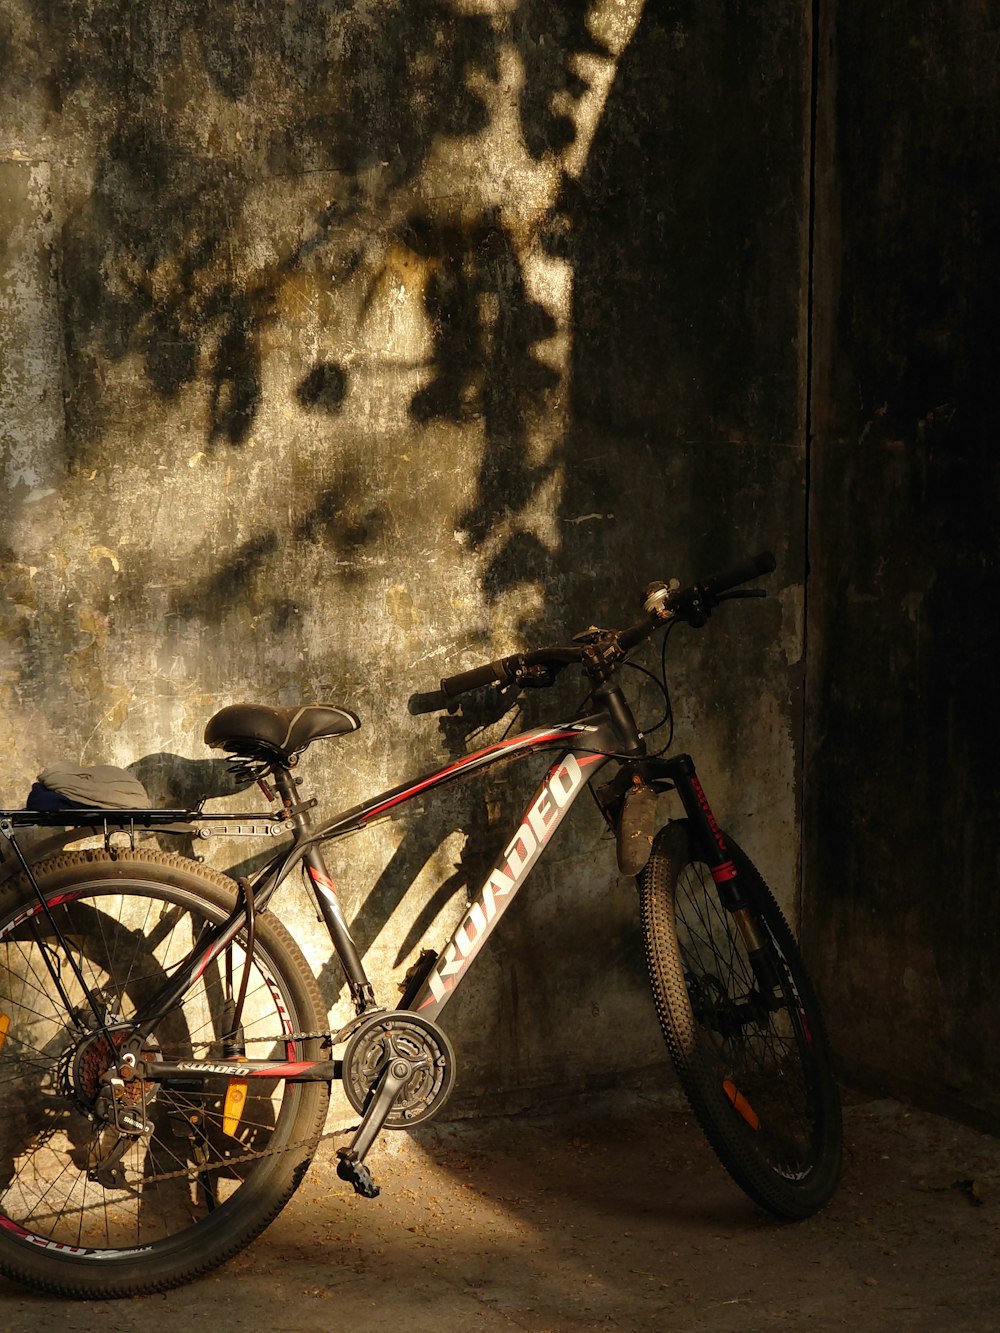 a bike leaning against a wall in the shade